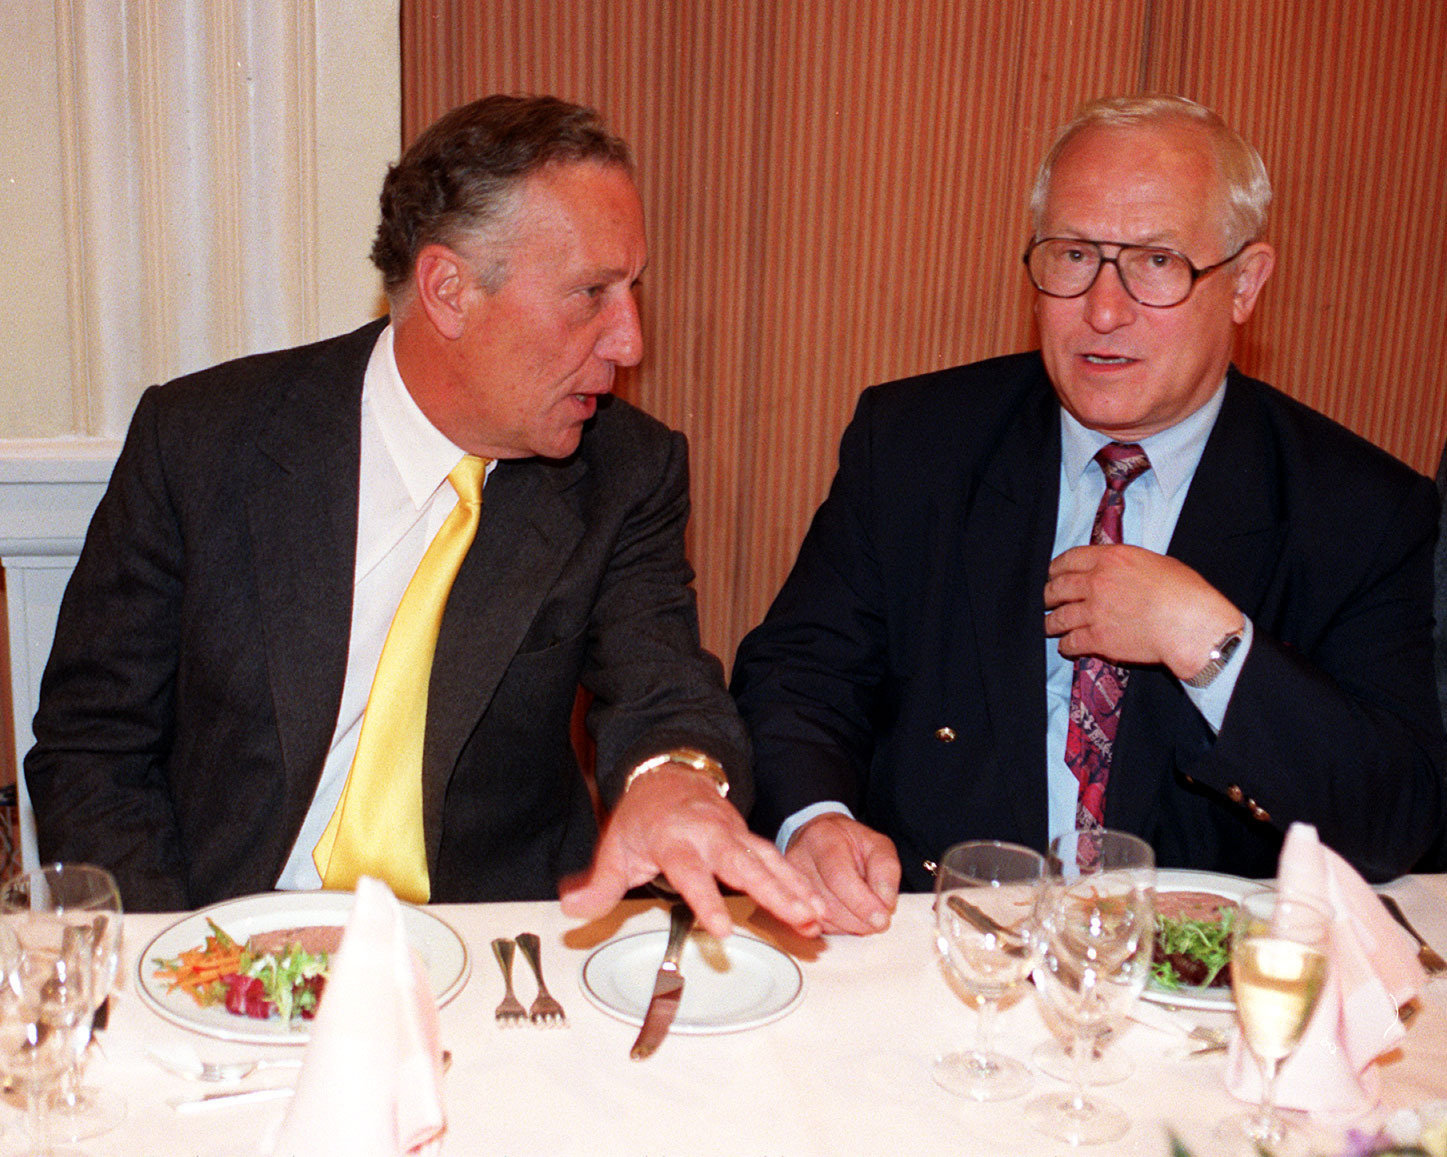 Author Frederick Forsyth (left) with Foyles luncheon chairman Oleg Gordievsky, at the Foyles Literary luncheon in honour of MR Forsyth, in London today (Weds). Photo by David Cheskin..